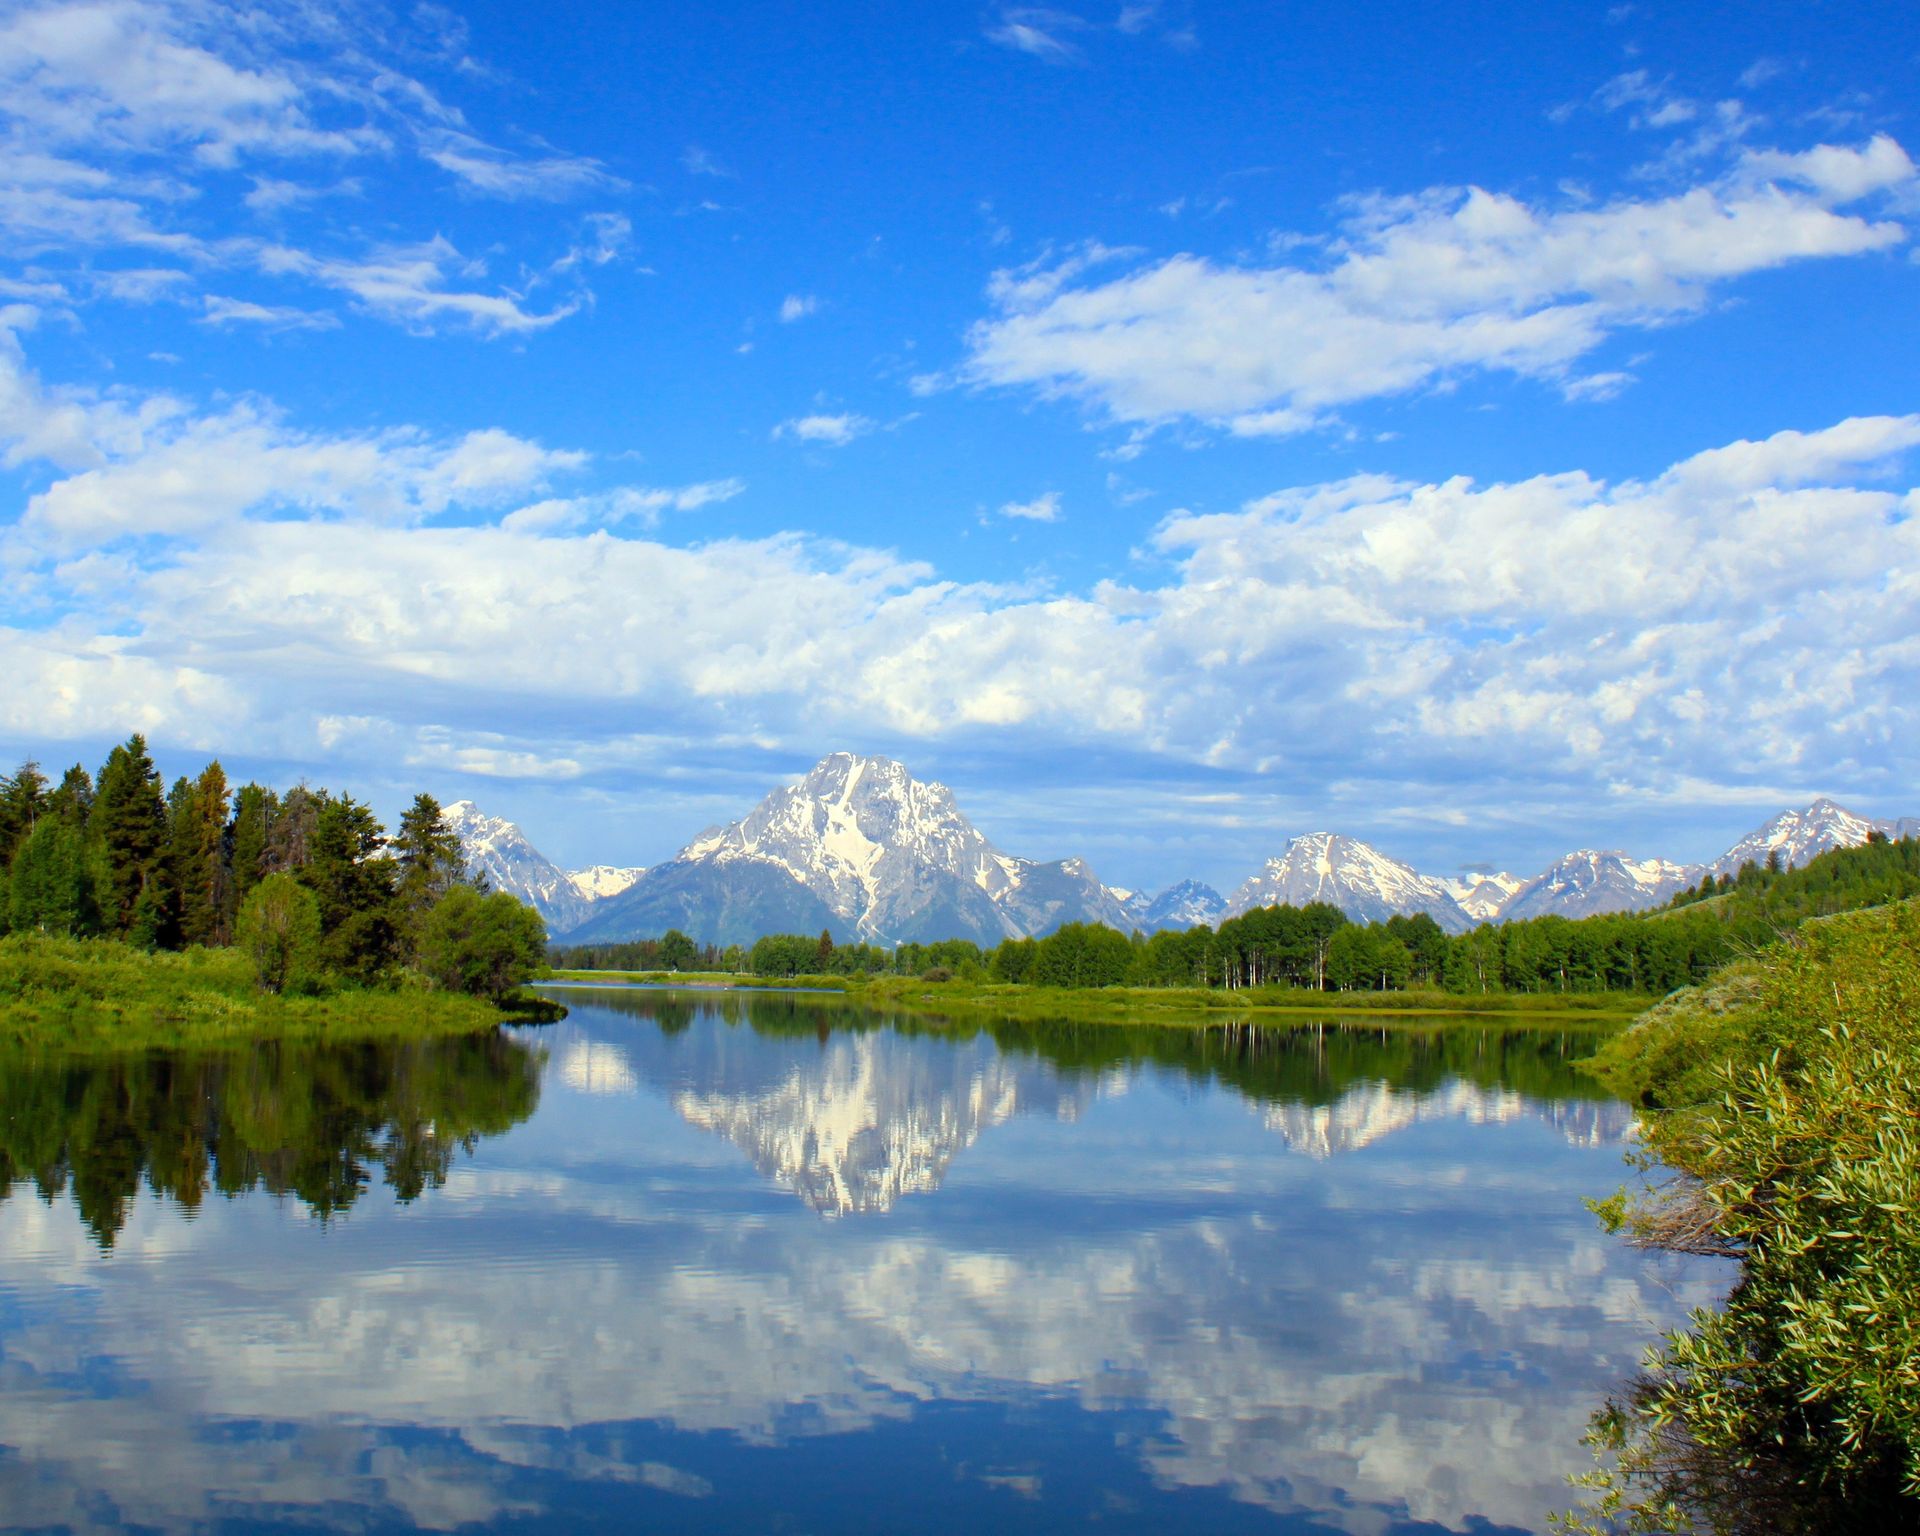 The Snake River runs by the Grand Teton Mountains in Wyoming.